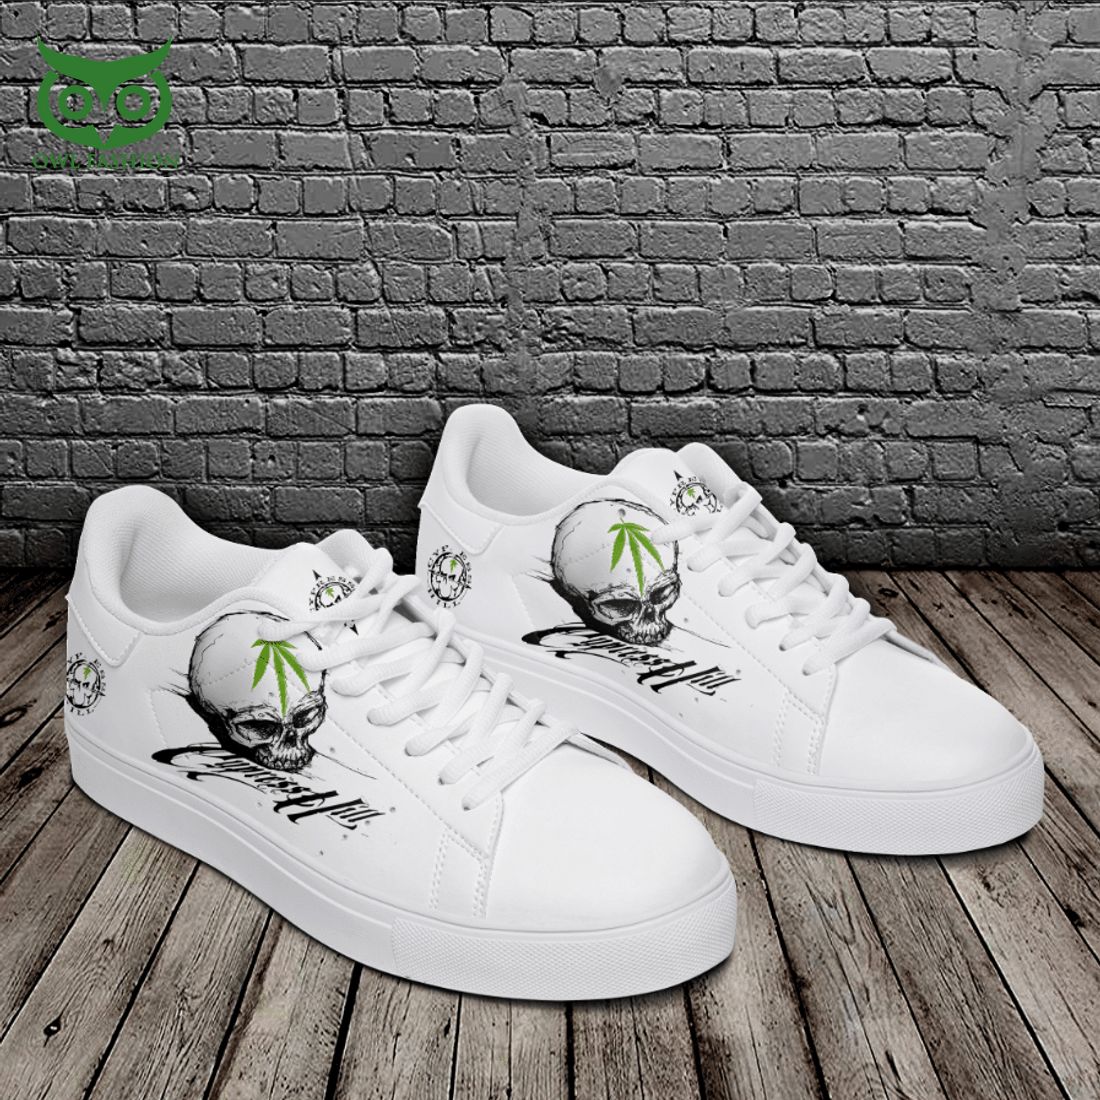 cypress hill skull grass 3d printed stan smith shoes 2 ZVtgx